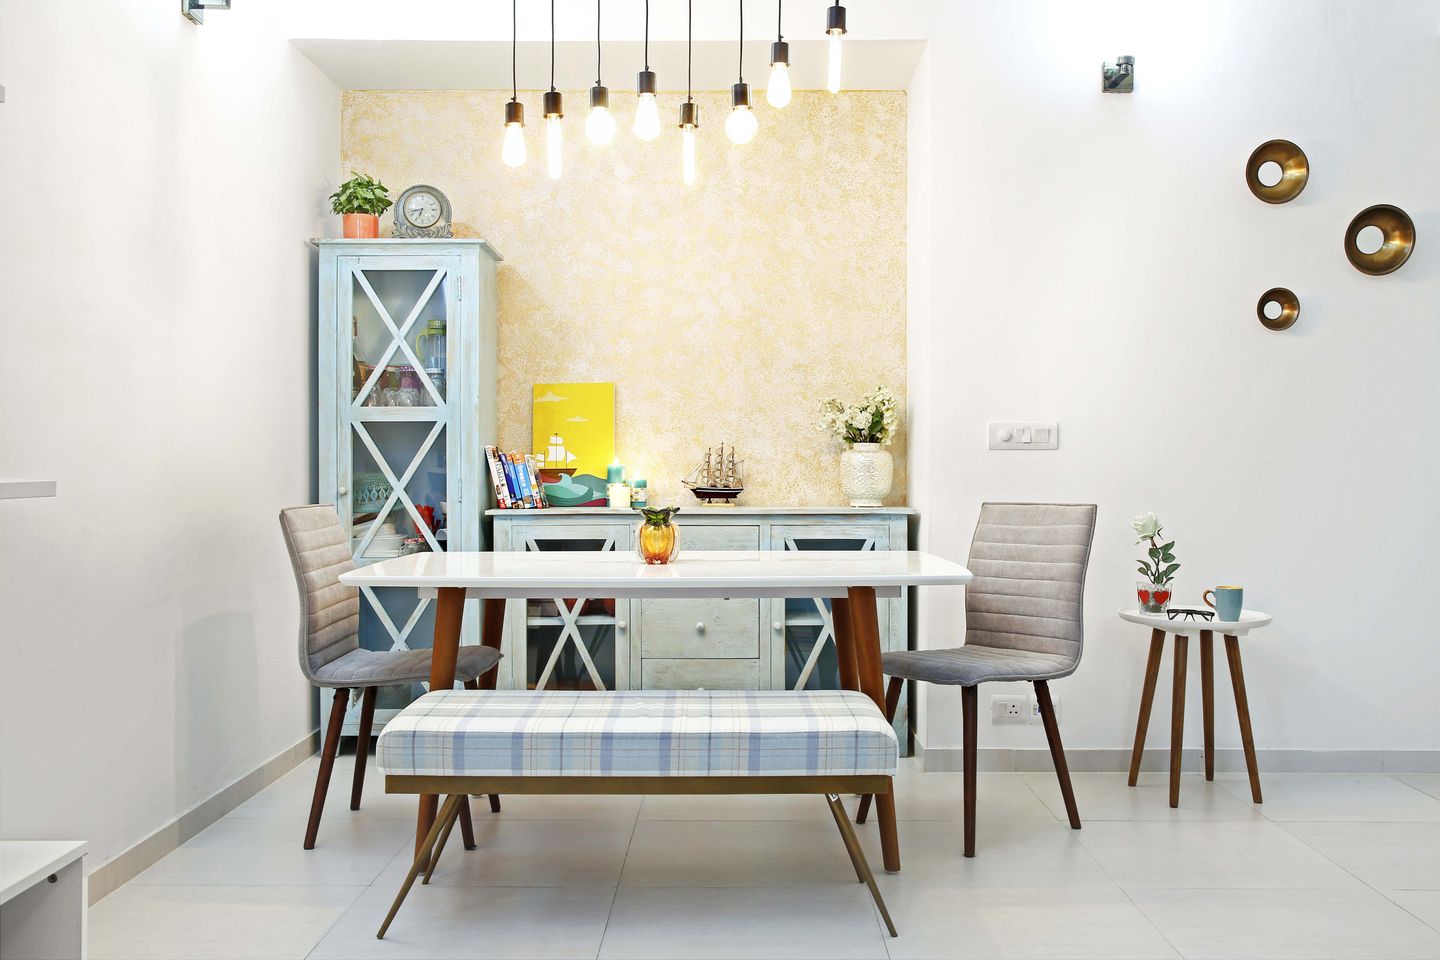 4-Seater Dining Room With A Crockery Unit And Wall Decor - Livspace